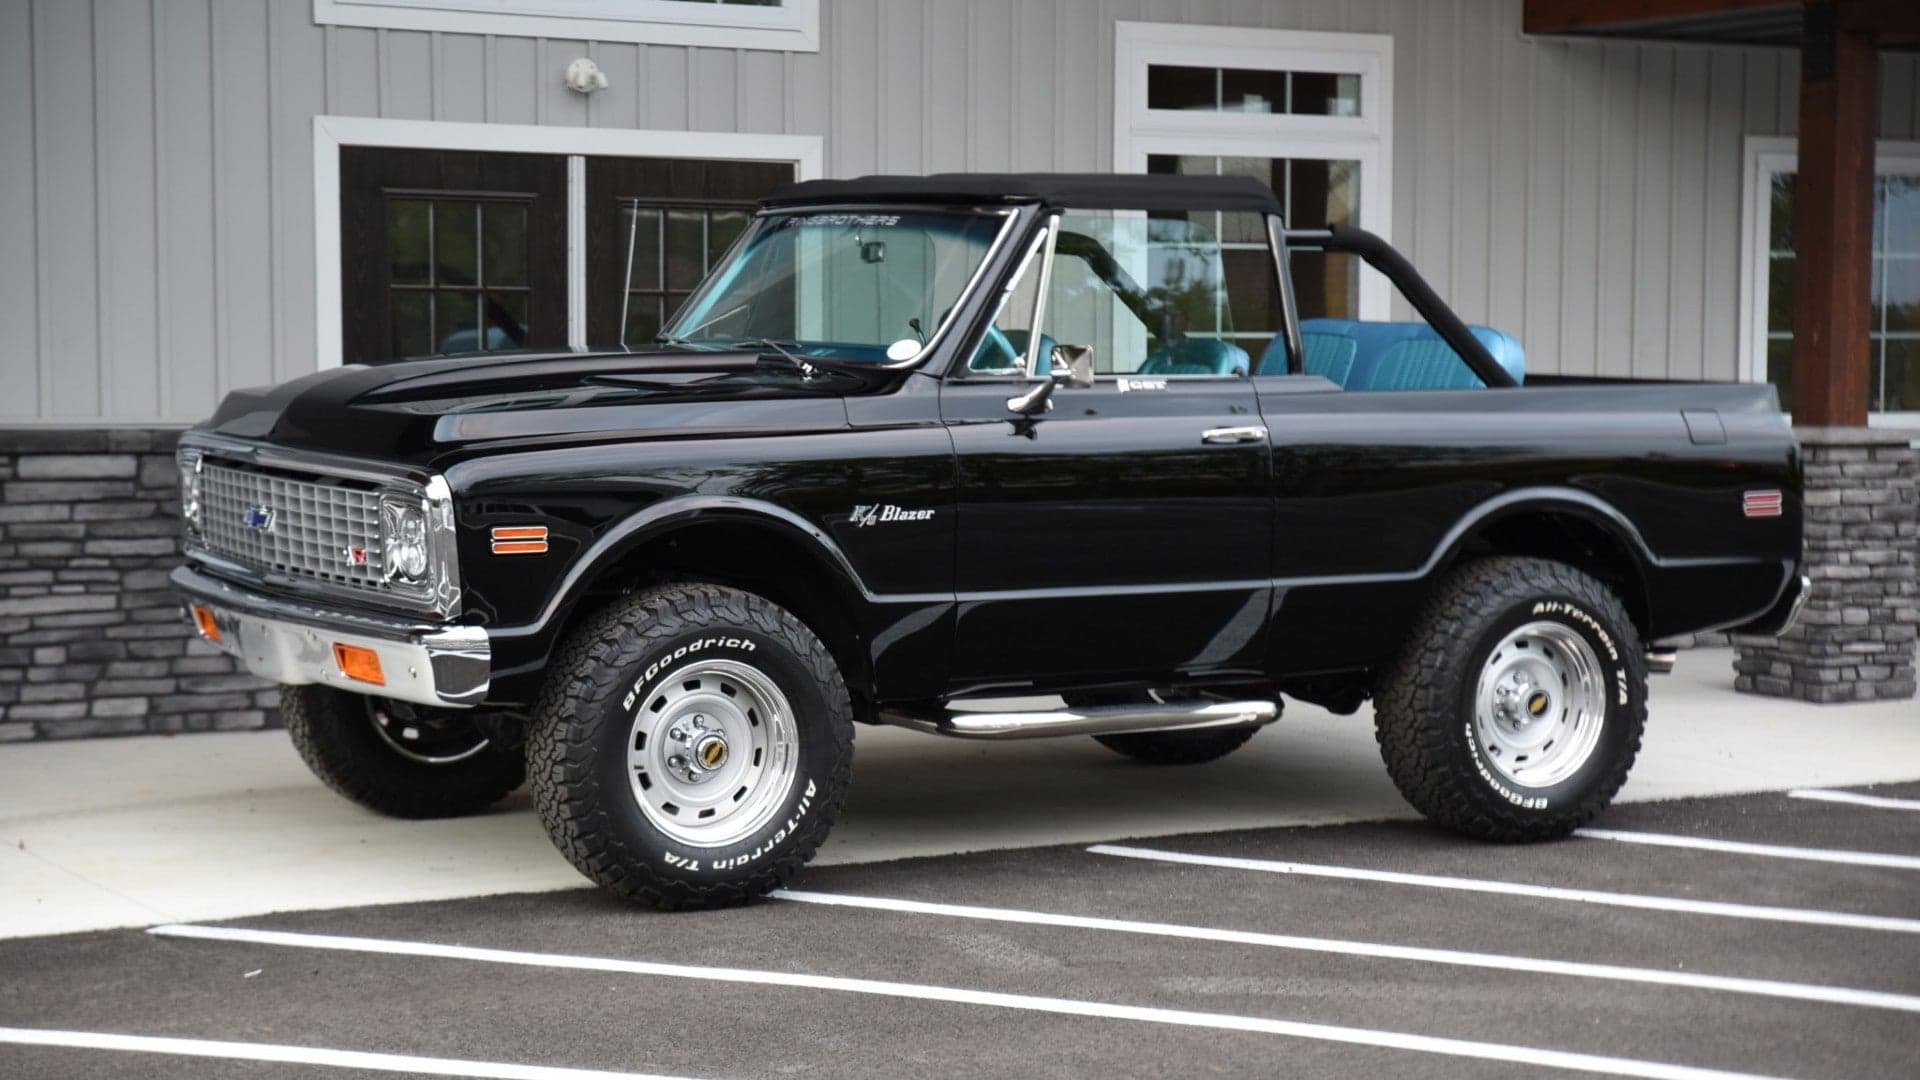 1972 Chevy Blazer K5 Restomod That Sold for $300K Has to Be a Record-Breaker